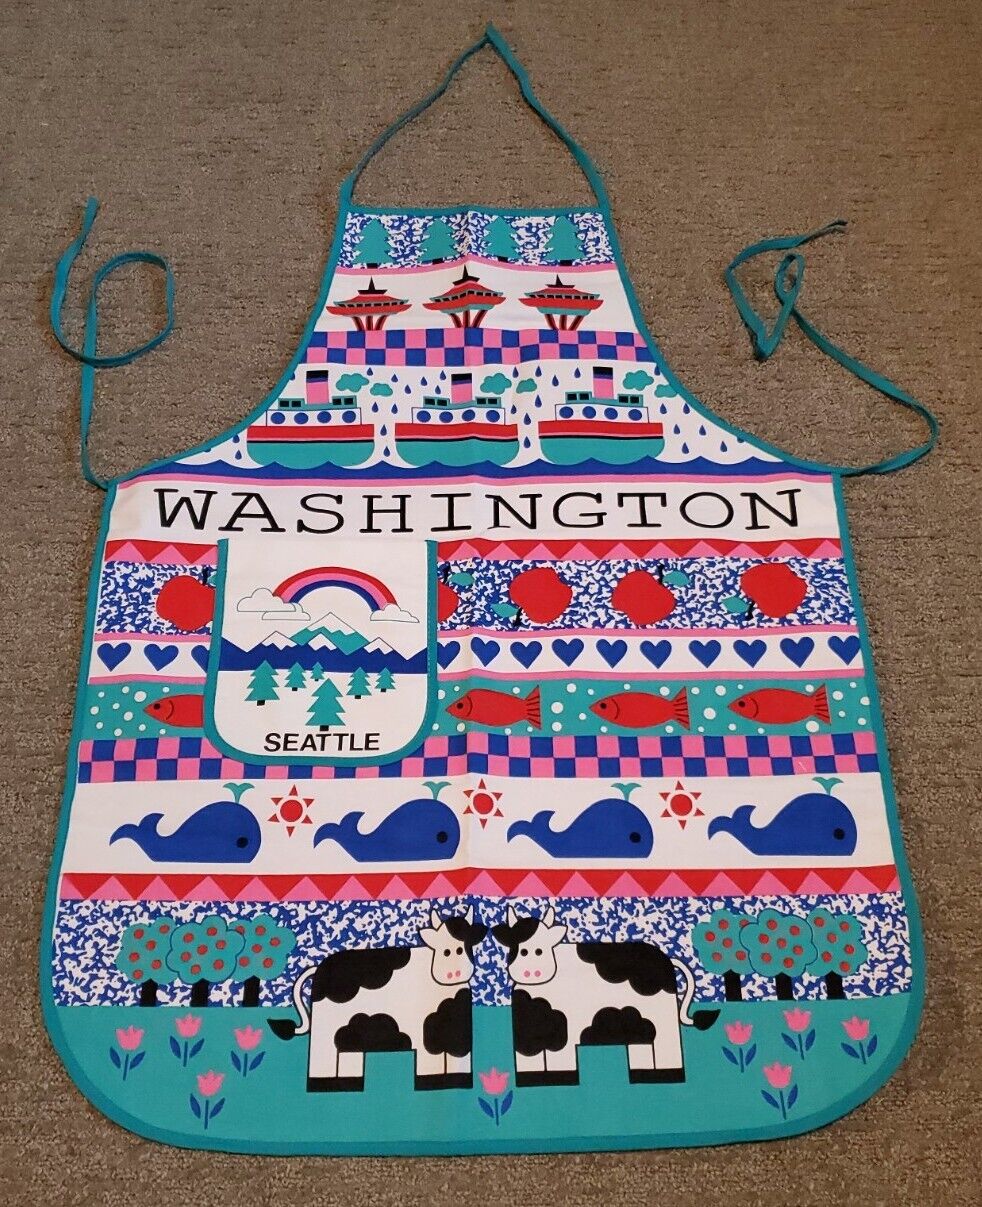 Seattle Washington Apron Turquoise Pink Blue Animals Cow Whale Fish Hearts Trees